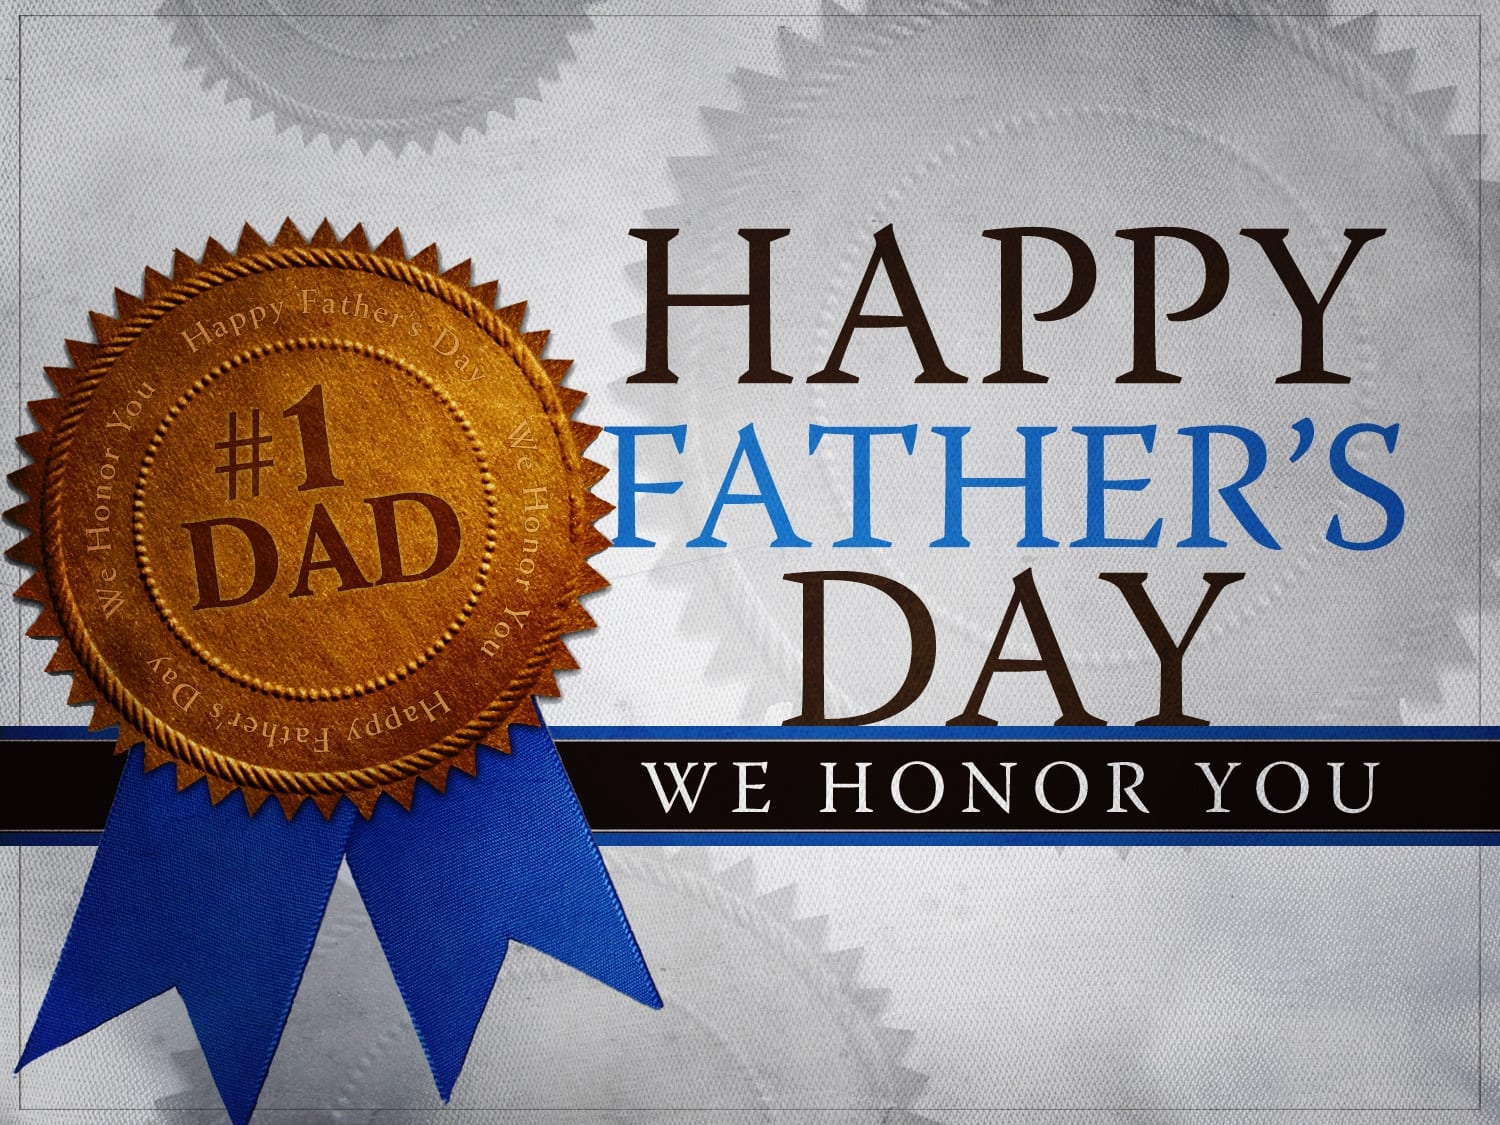 Fathers day messages inspirational Happy Father's